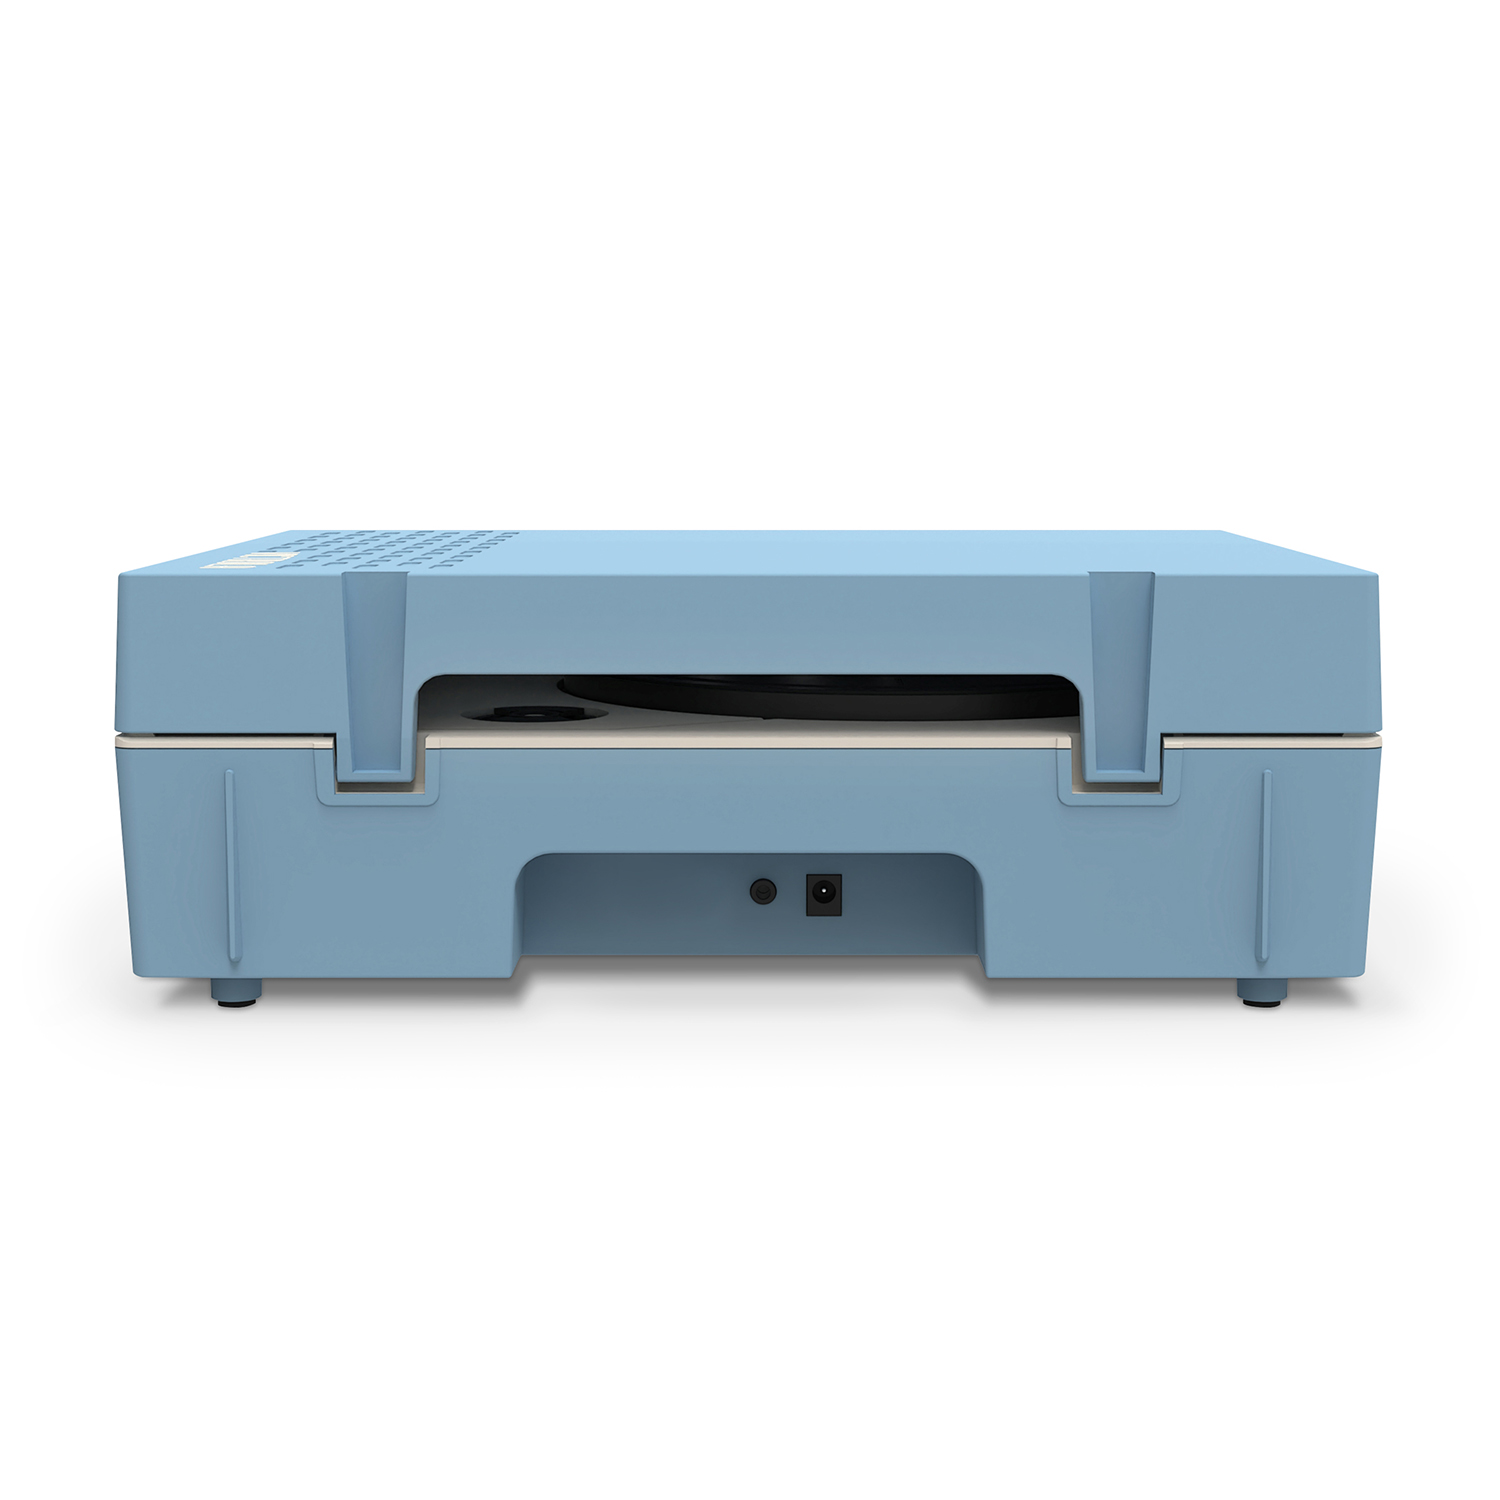 Victrola Re-Spin Sustainable Bluetooth Suitcase Record Player- Light Blue | Walmart Exclusive - image 6 of 20